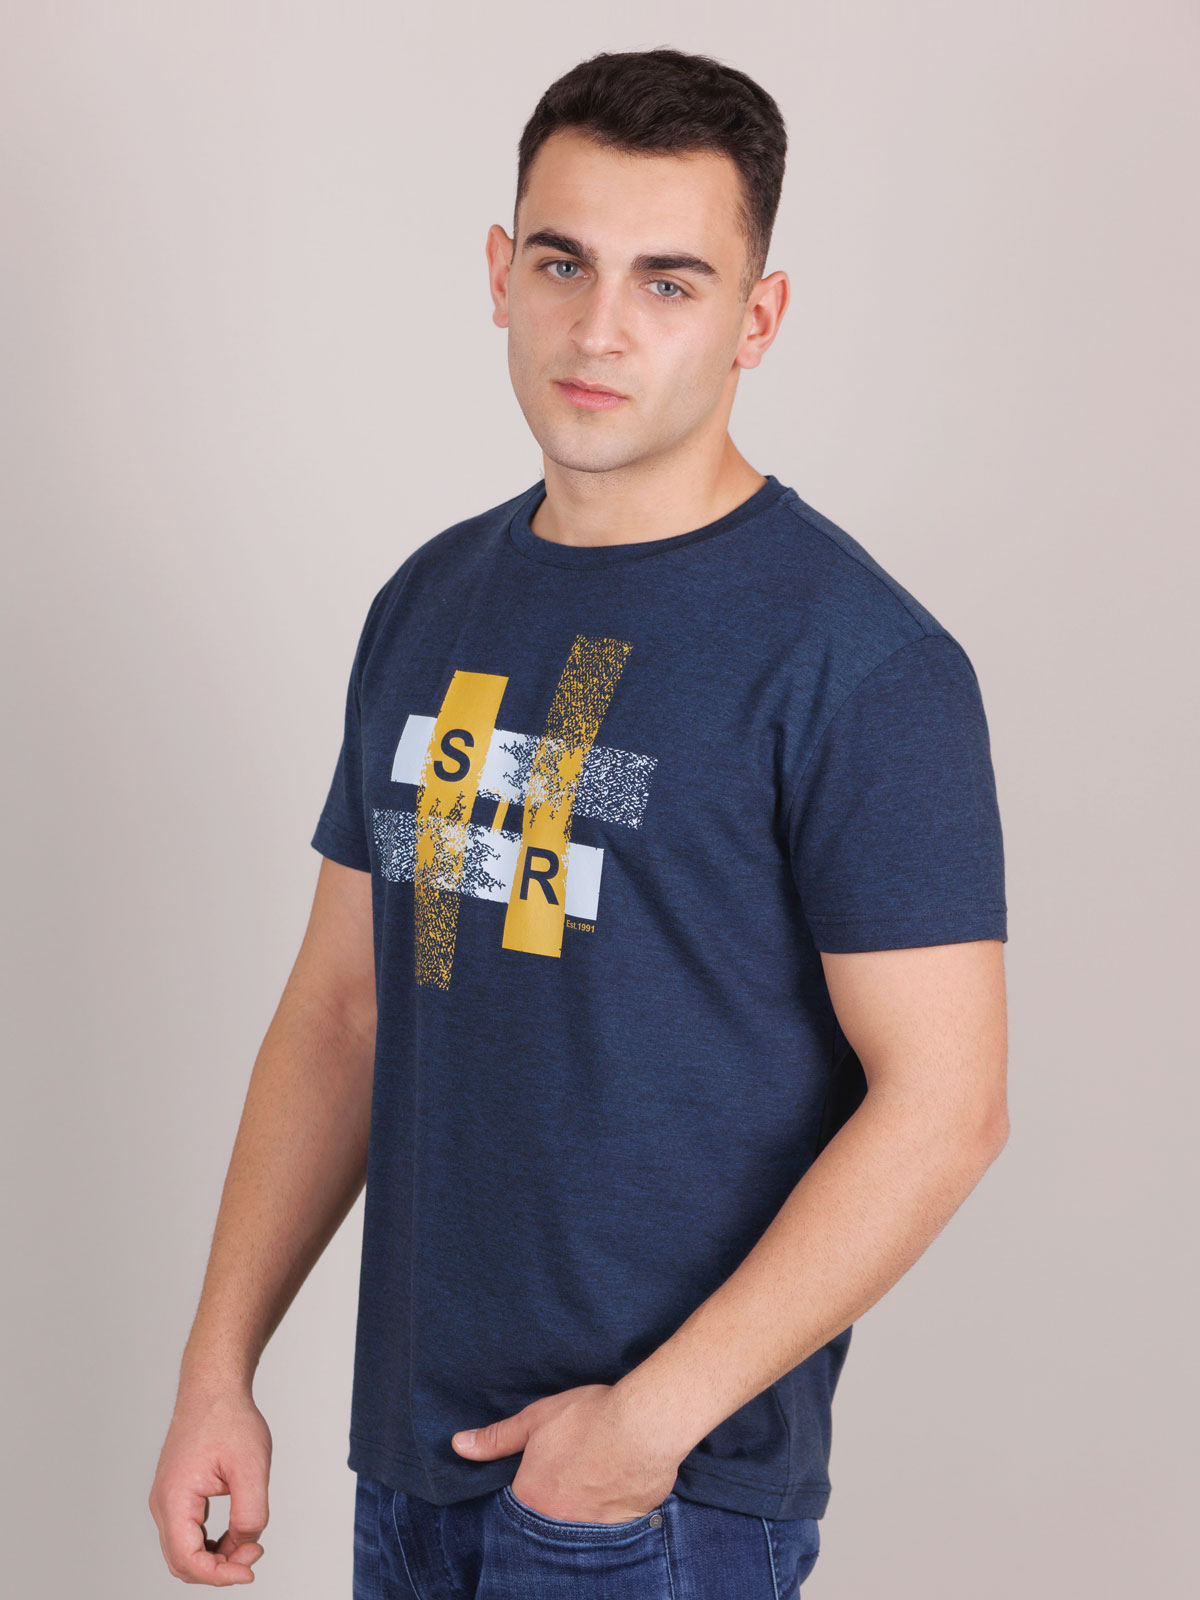 Tshirt in blue with a color print - 96461 € 23.62 img4